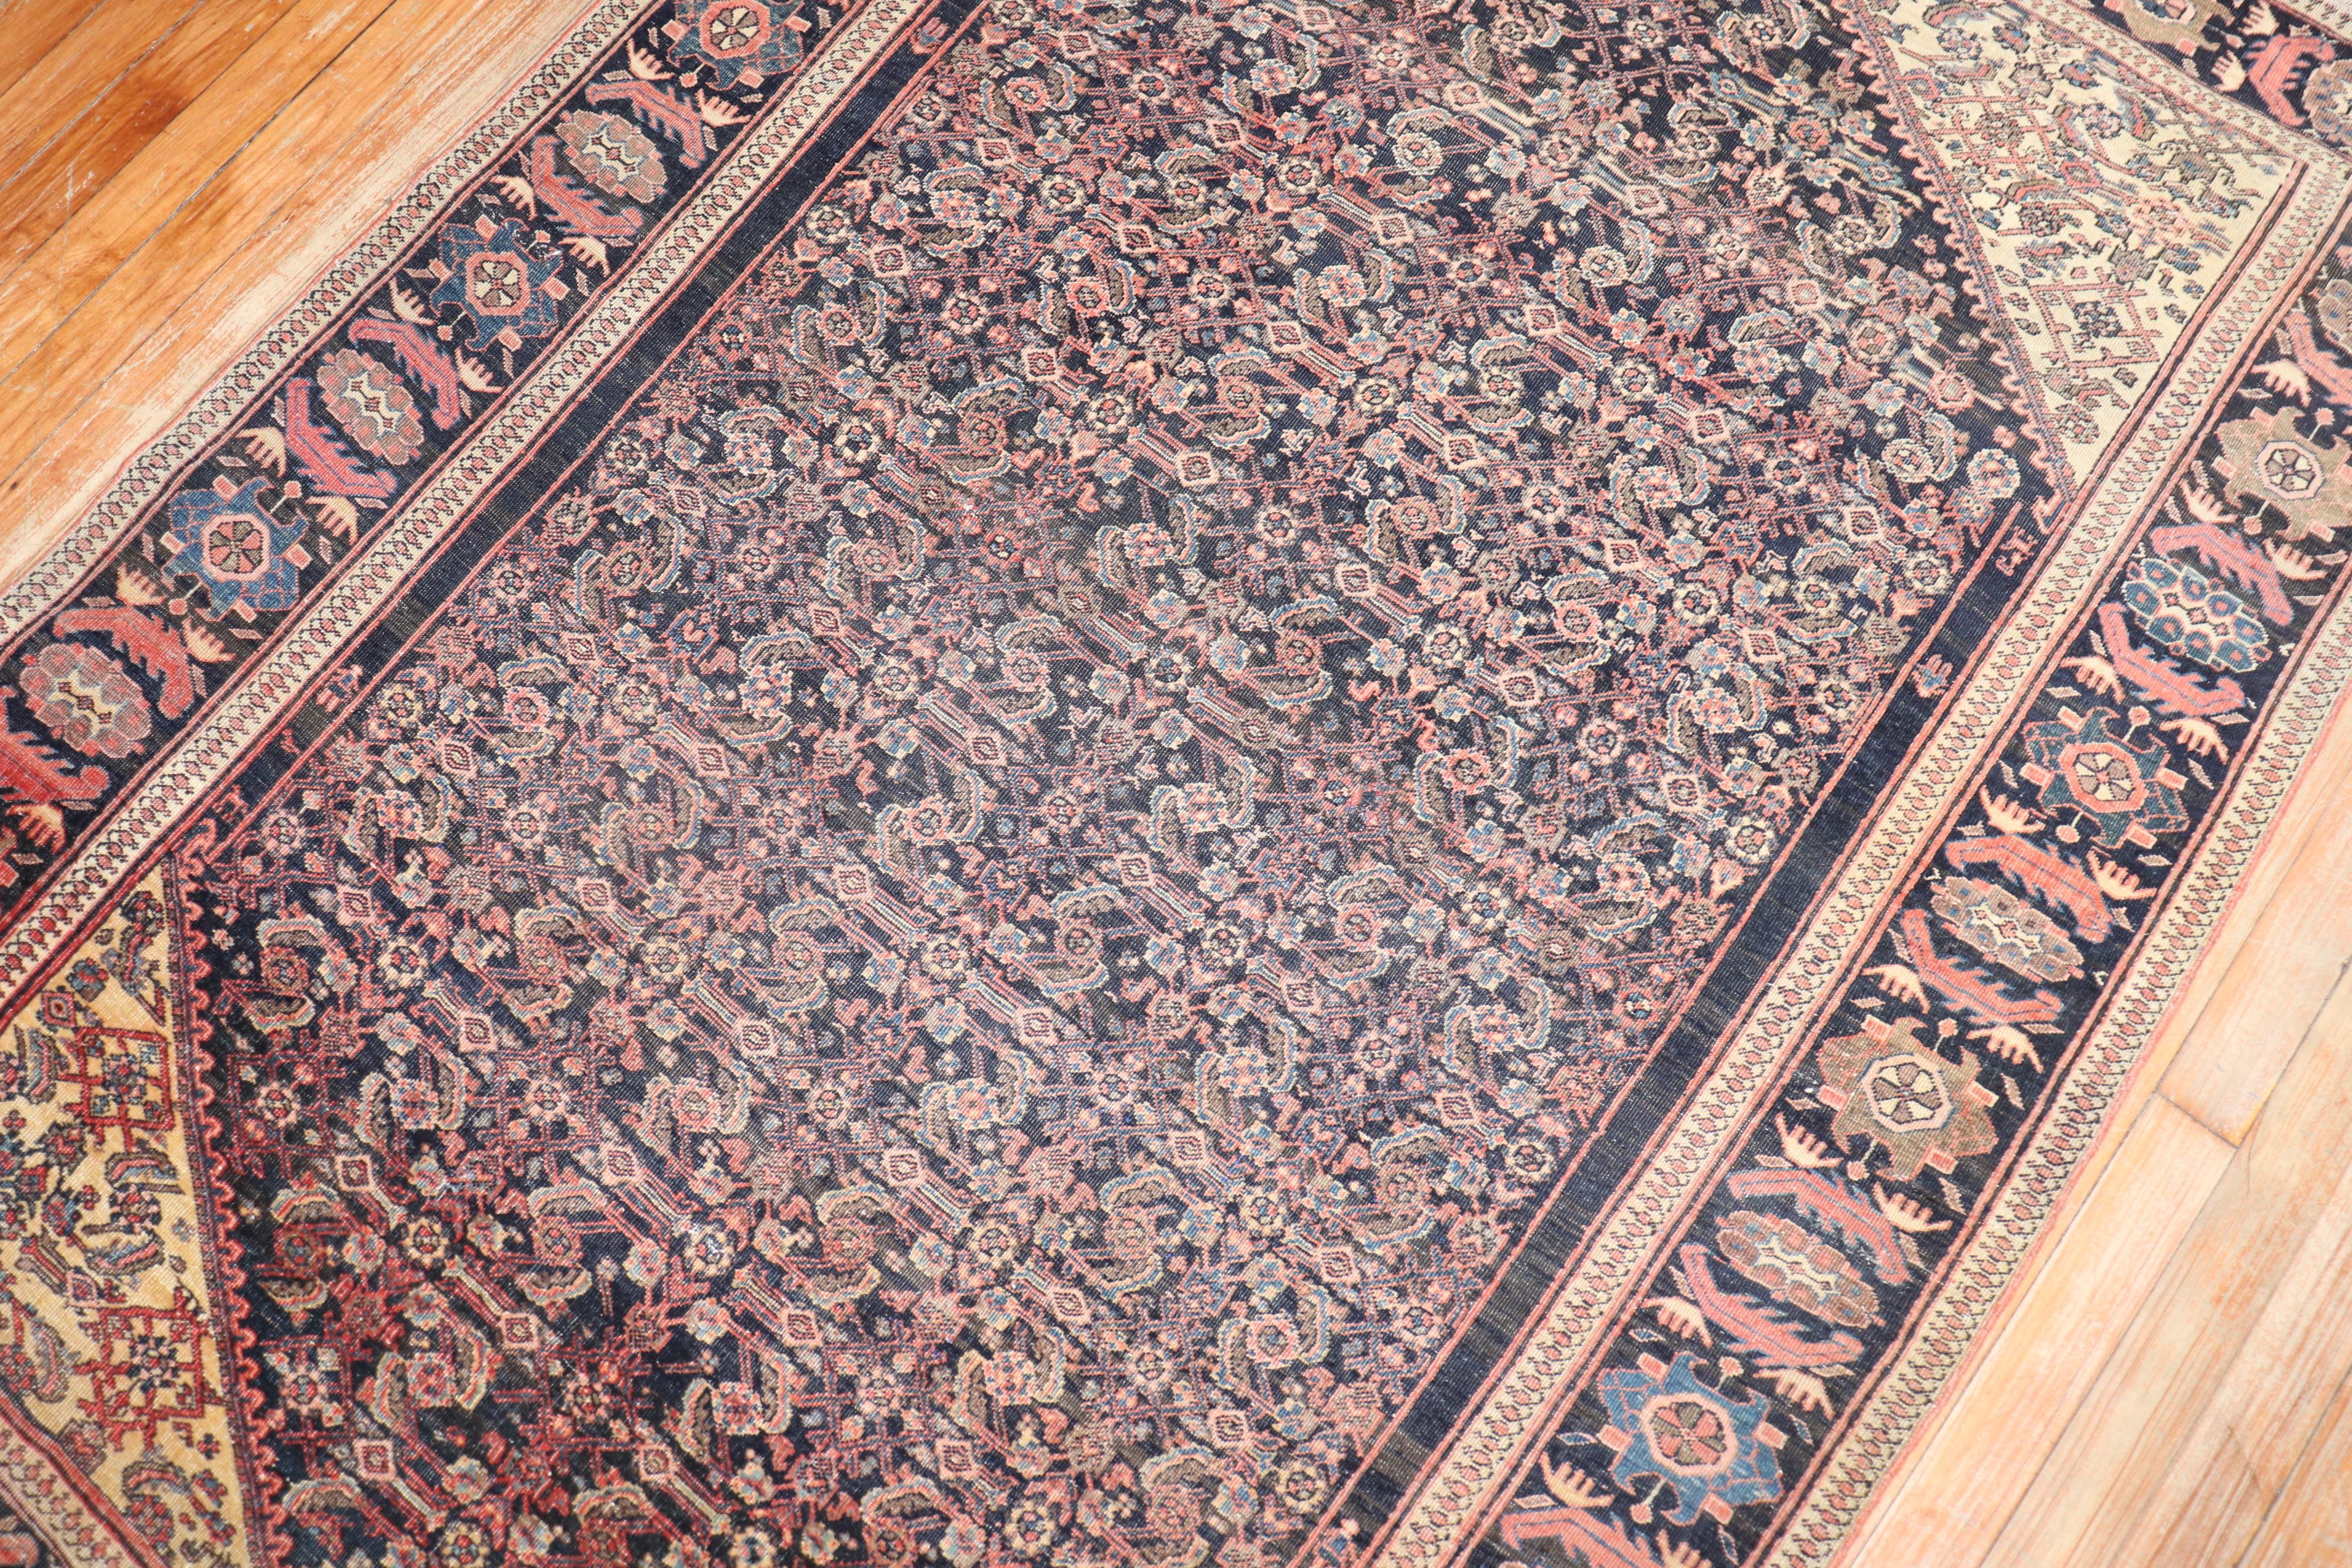 An authentic Persian Sarouk Farahan rug from the last quarter of the 19th century with a Classic all-over Herati motif. on a navy ground.

Measures: 4'2'' x 6'.